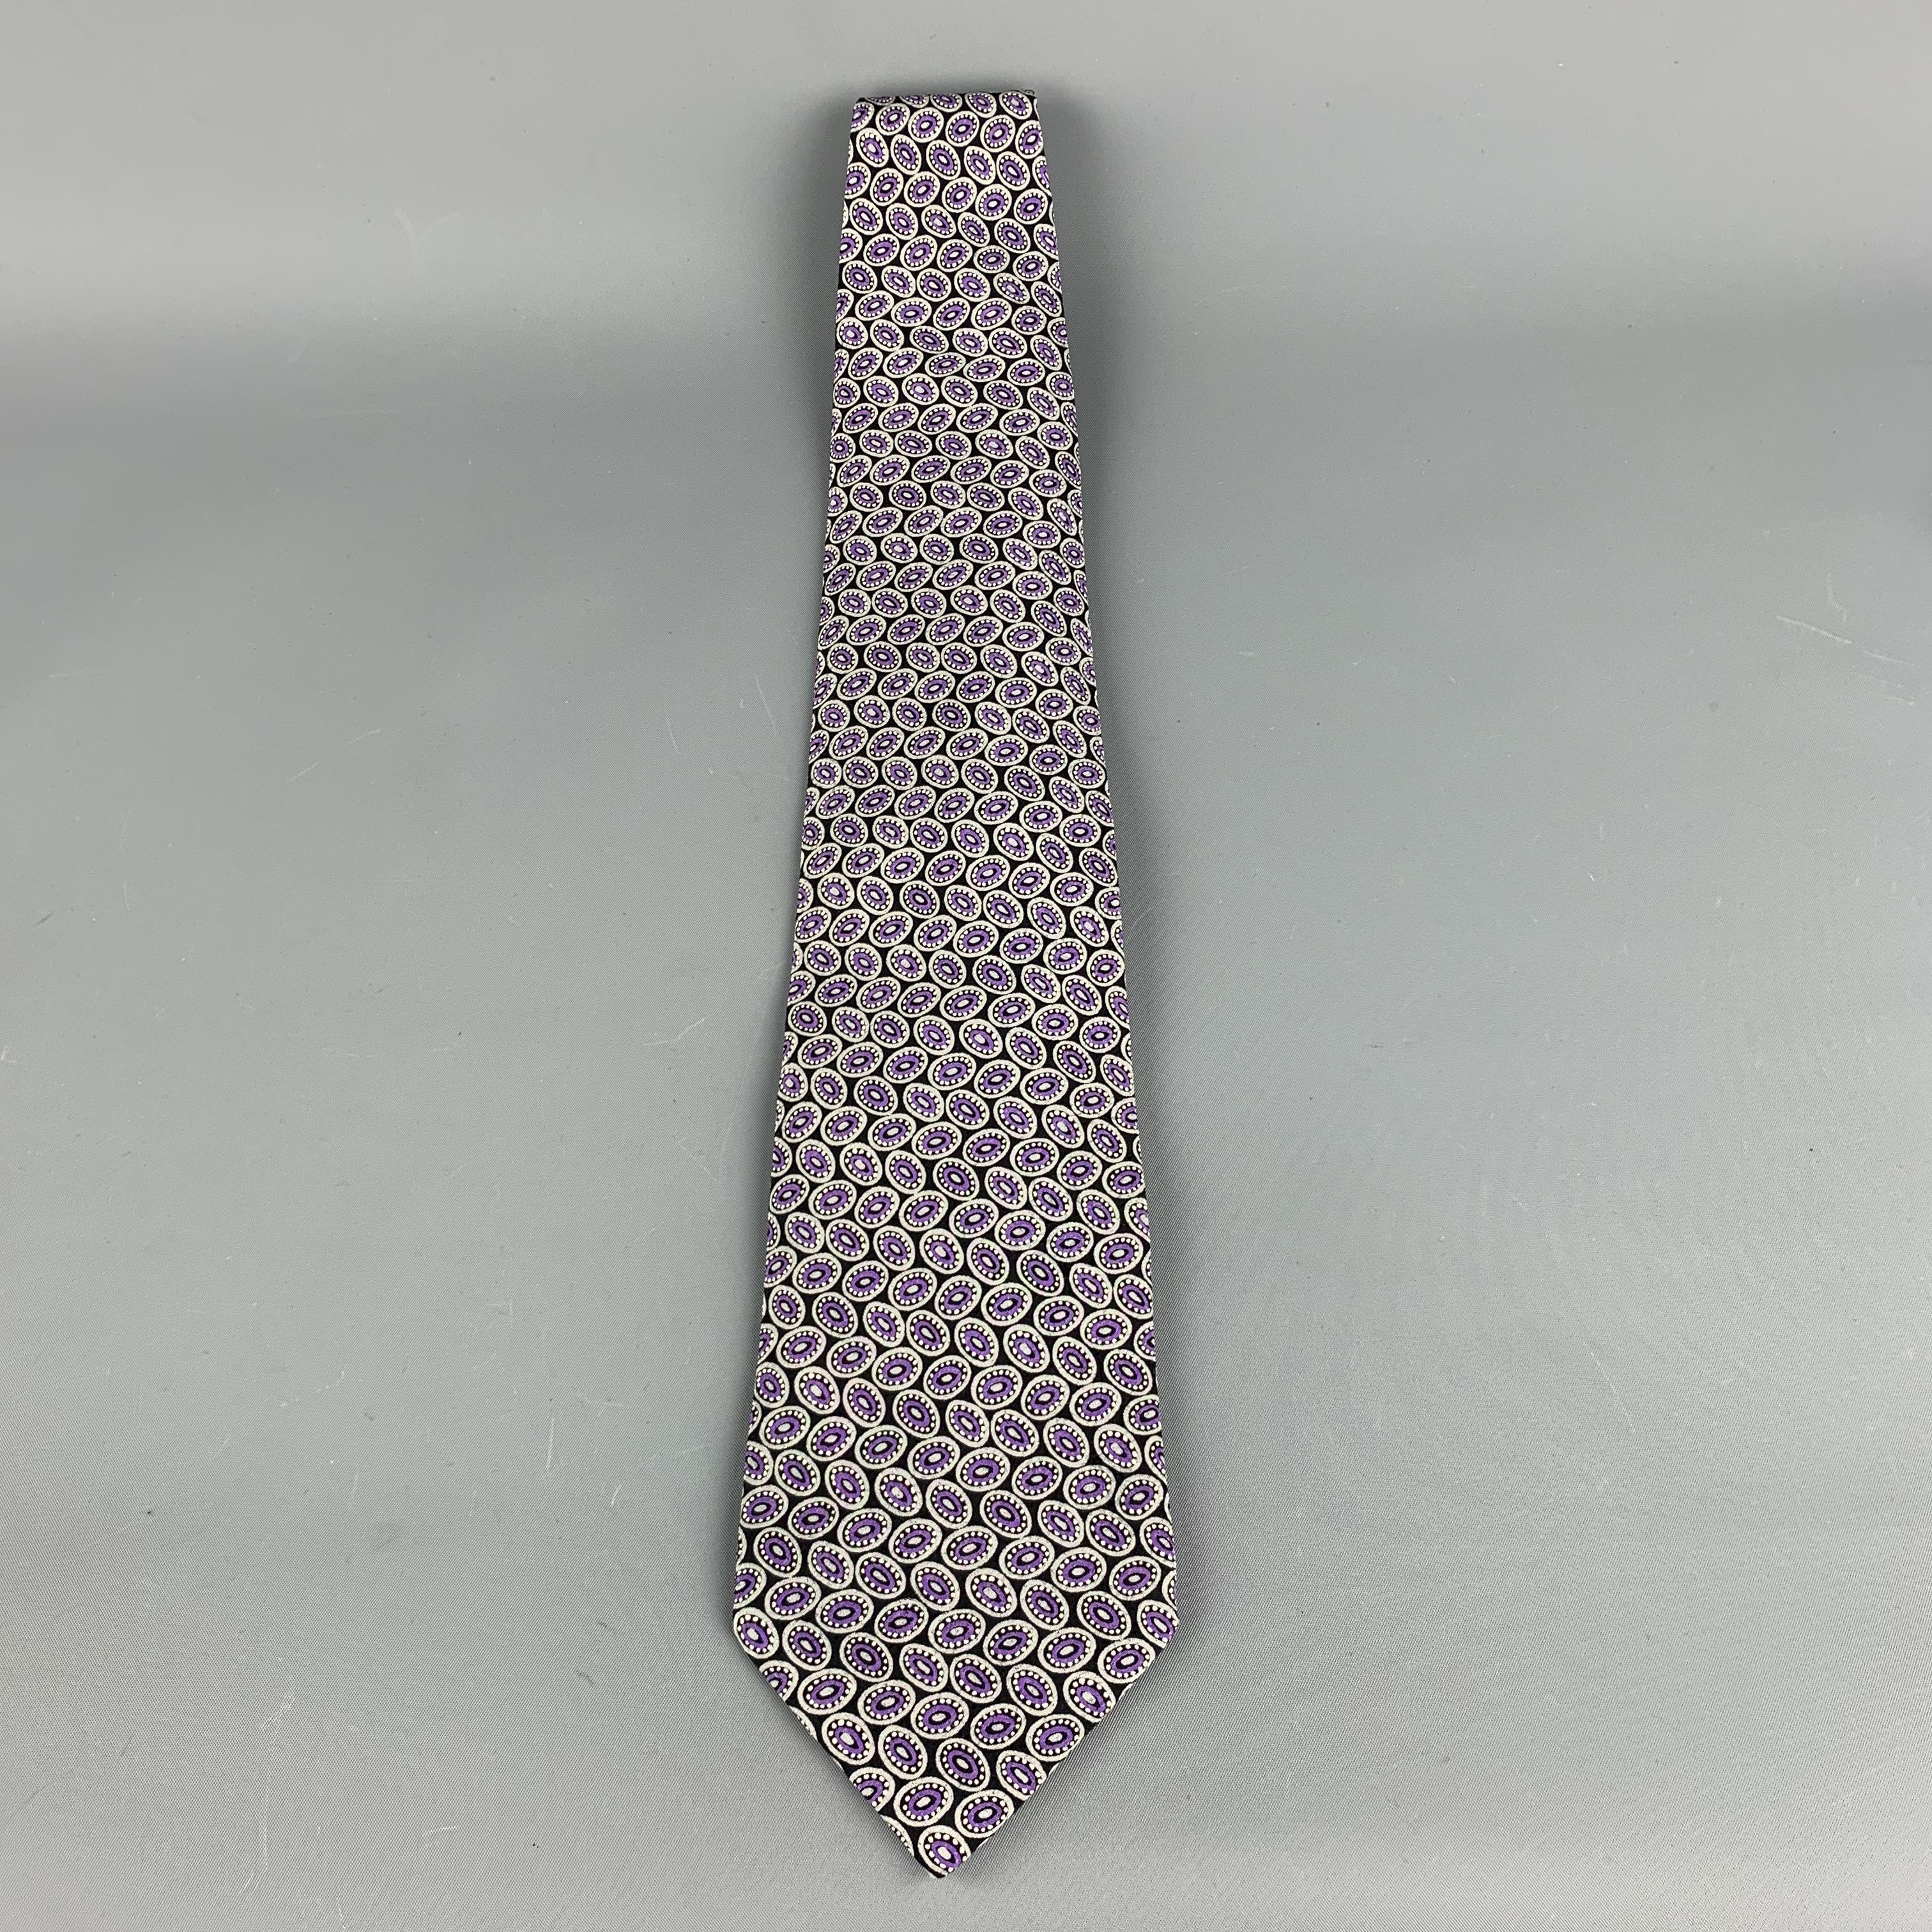 BRIONI Tie comes in black and purple tones in a silk material, with all over dots print and a gold metal tone hardware. Handmade. Made in Italy.
 
Excellent Pre-Owned Condition.
 
Width : 4 in
